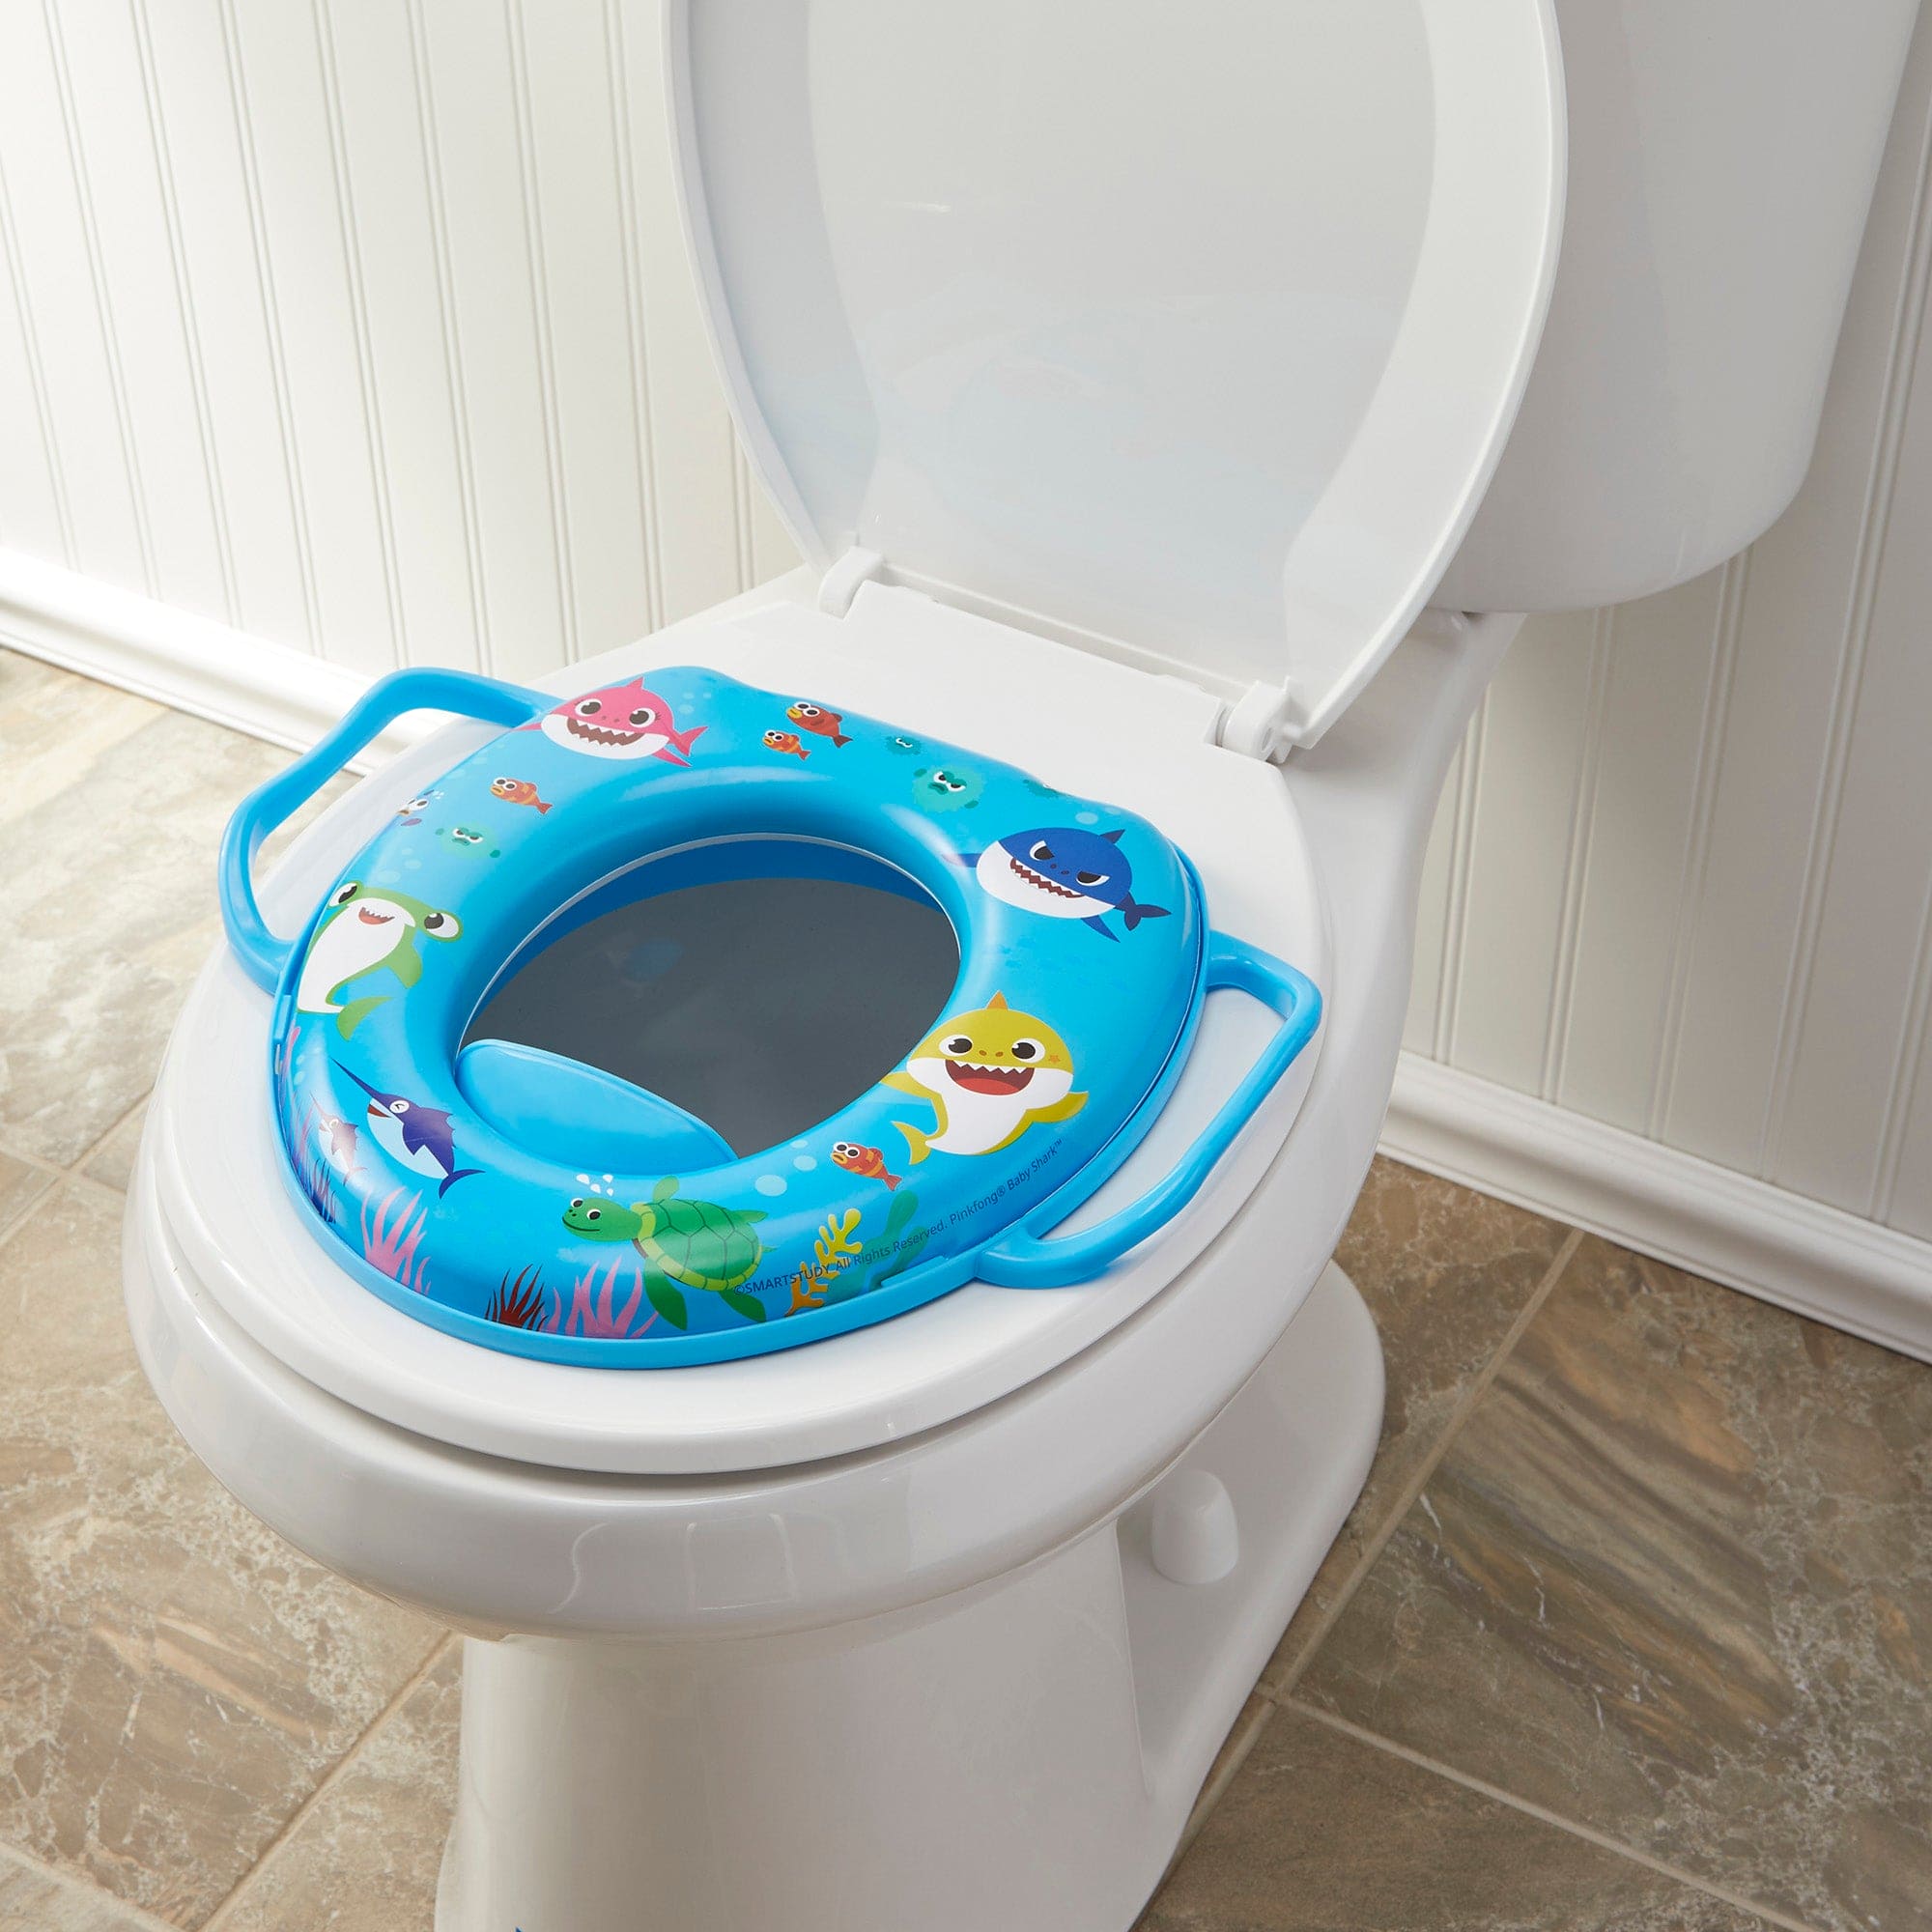 Baby Toilet Seat Cushion, Portable Toilet Training Seat For Children, Non-Slip Baby Kids Seat Potty Chair with Handle, Kids Toilet Soft Cushion with Splash Protector